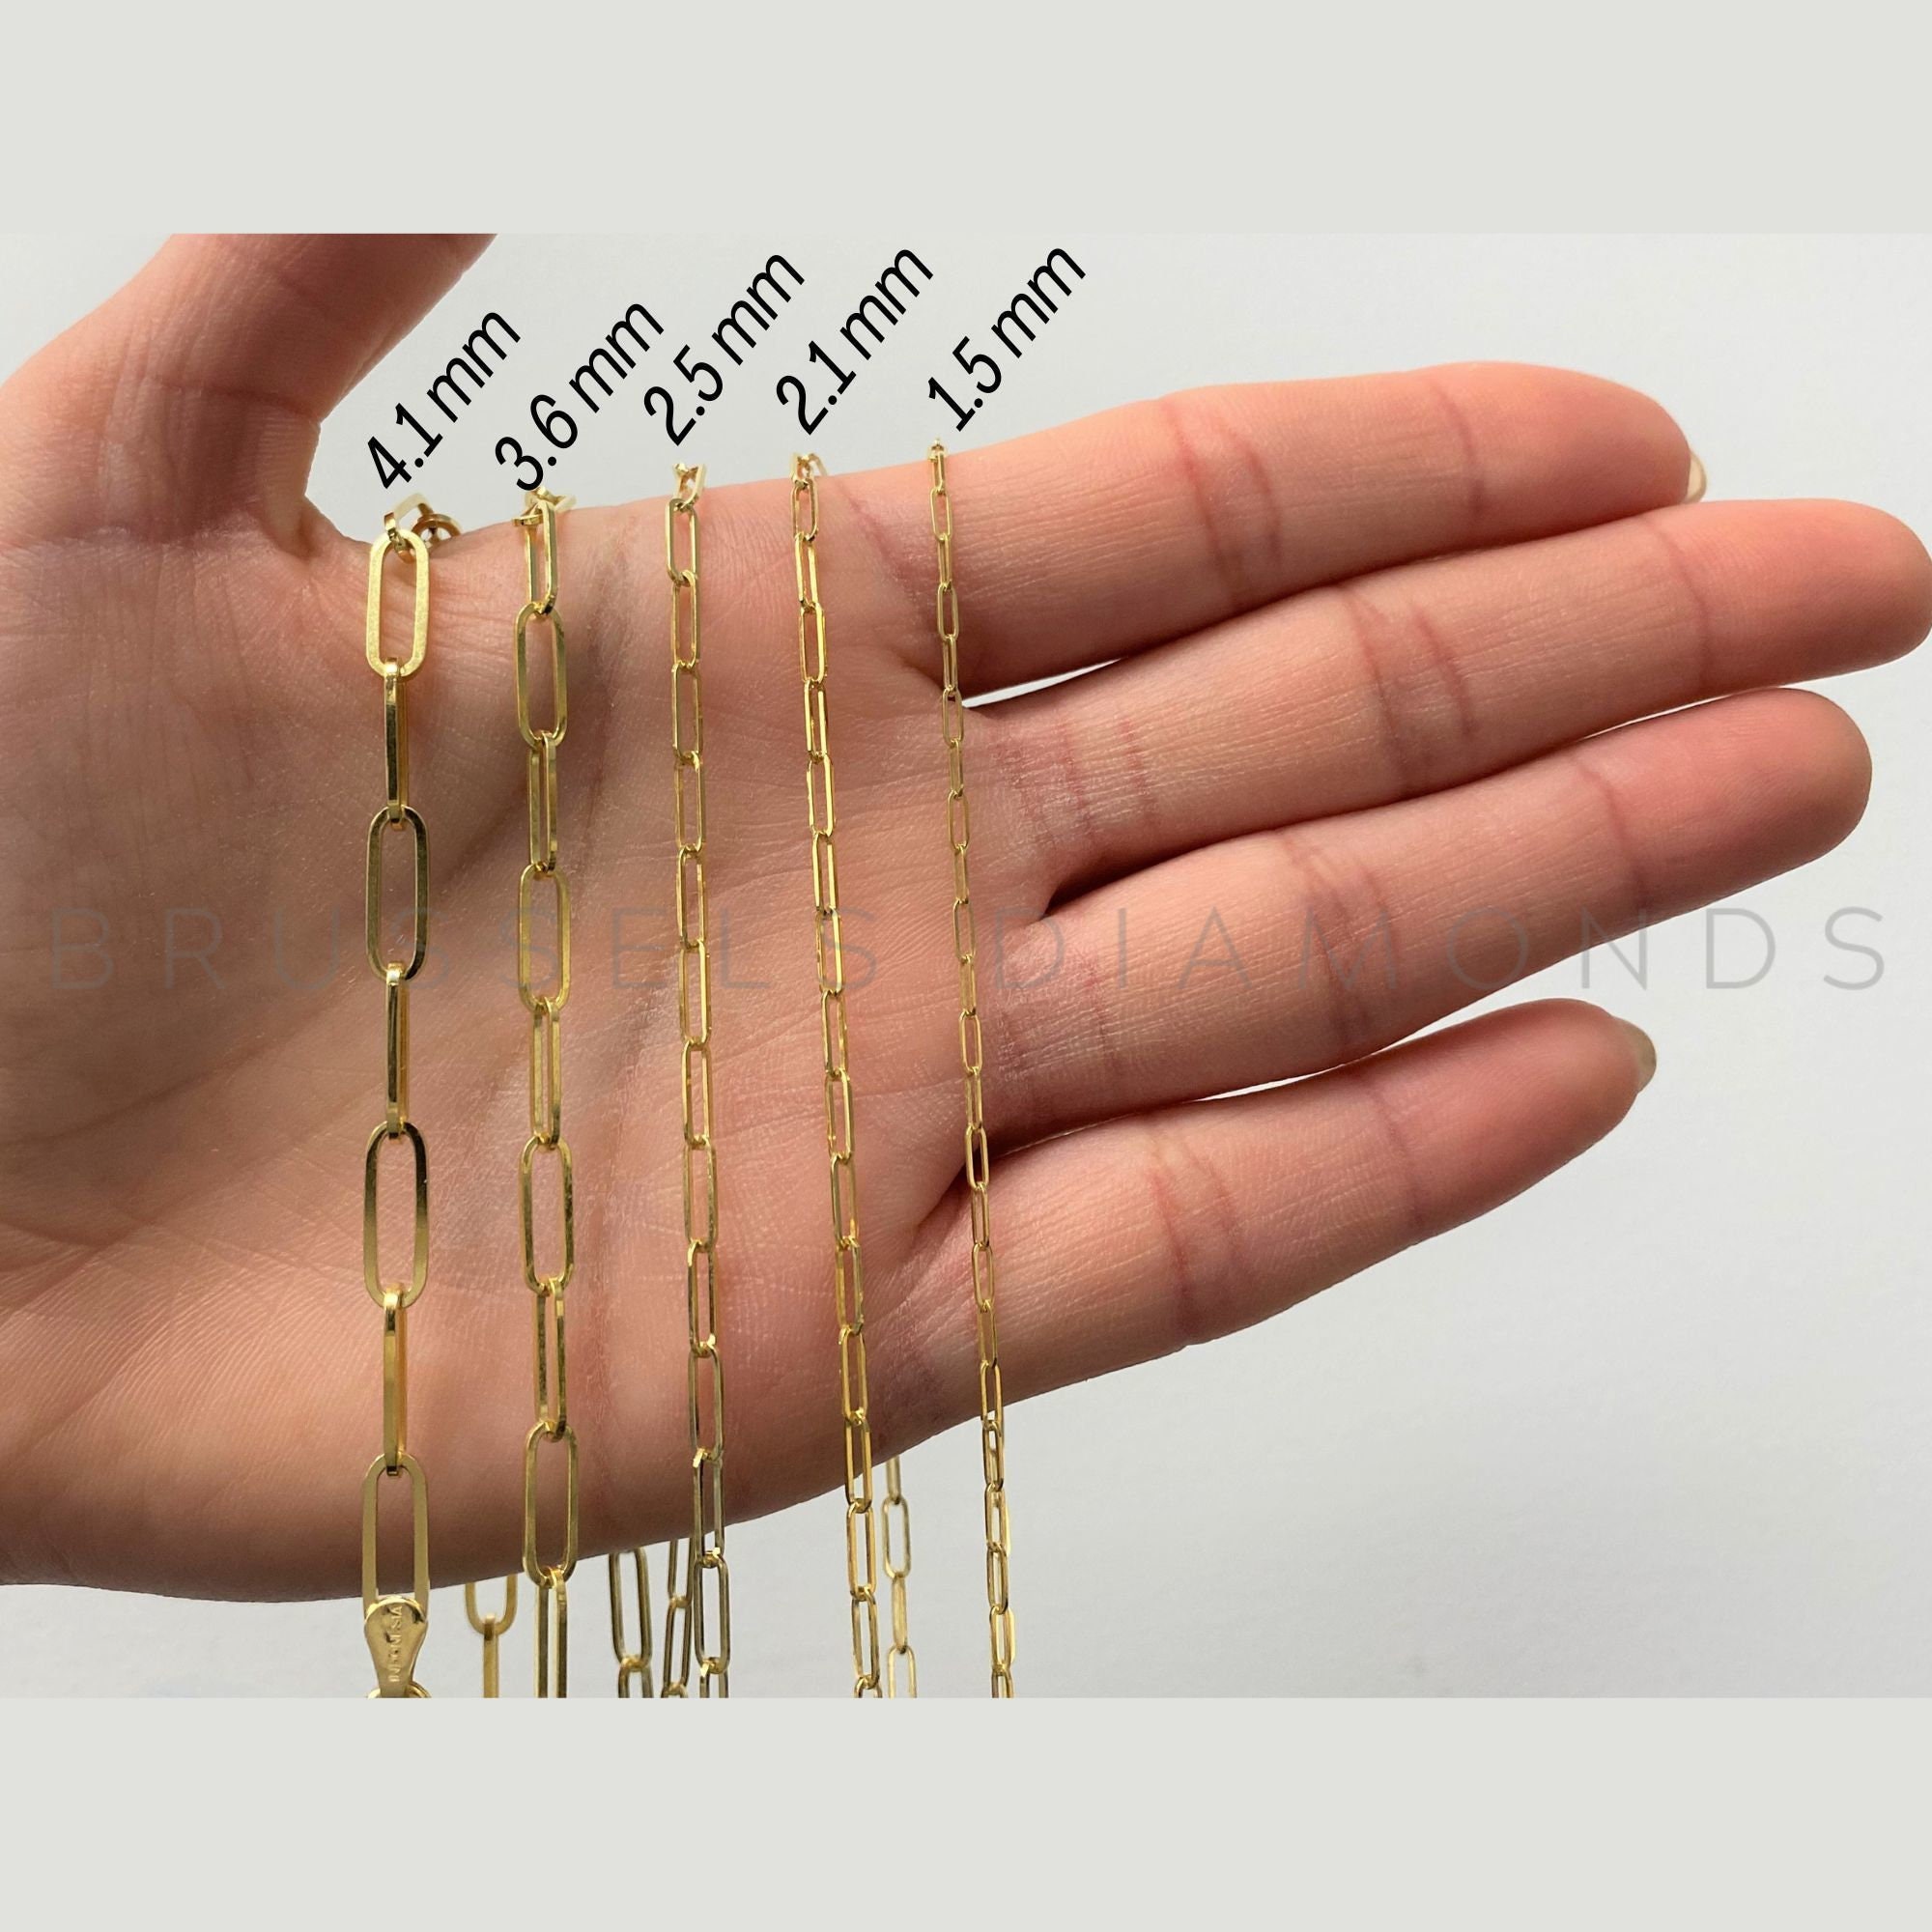 Gold Paperclip Chain Necklace | Helen Ficalora 14K Yellow Gold / 36in by Helen Ficalora